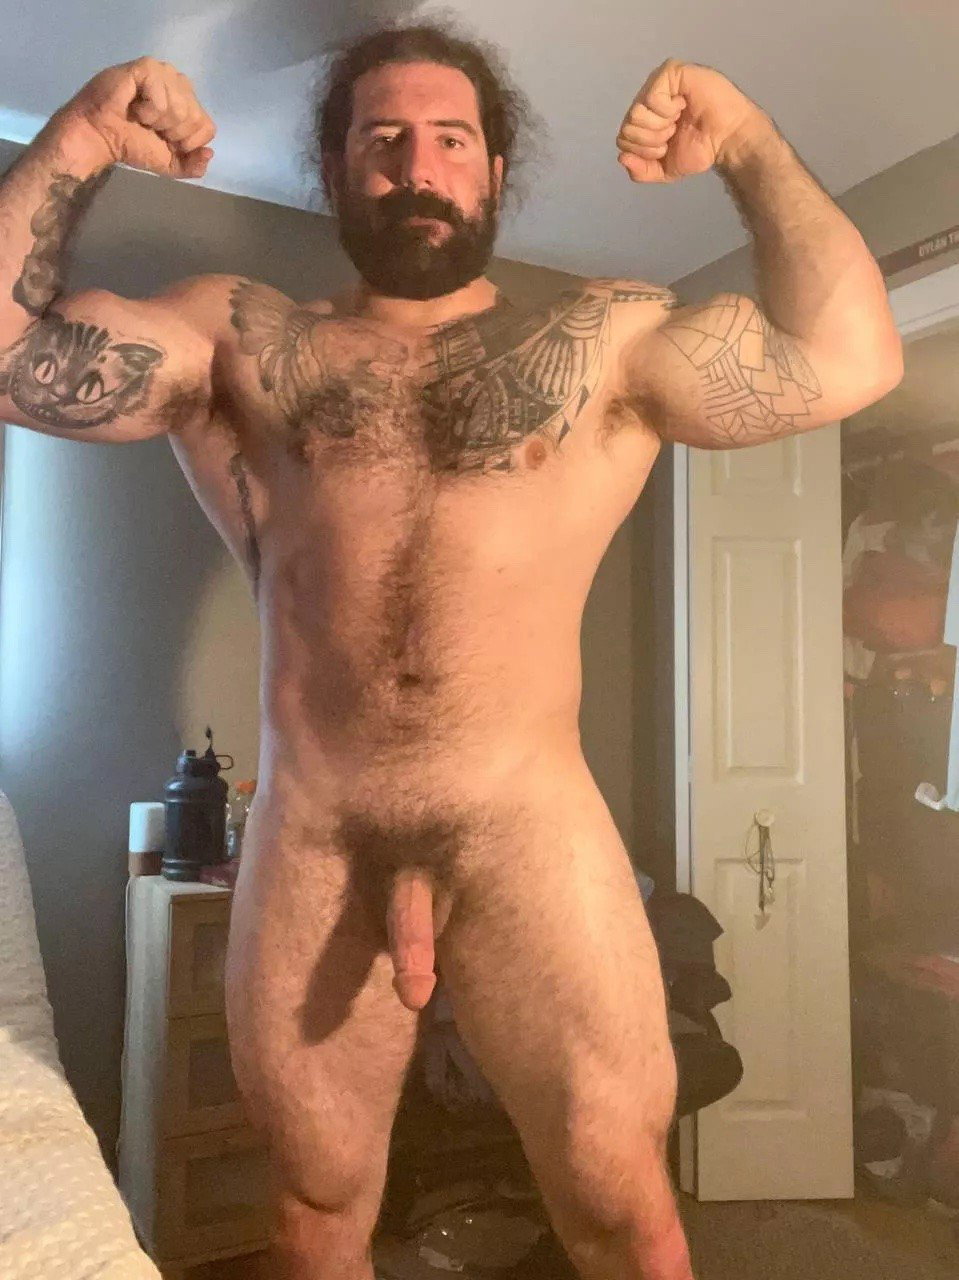 Watch the Photo by Ultra-Masculine-XXX with the username @Ultra-Masculine-XXX, posted on December 7, 2023. The post is about the topic Gay Bears. and the text says 'Dylan Thompson a.k.a. dylanmarkss #DylanThompson #dylanmarkss #hairy #muscle #bear #beard'